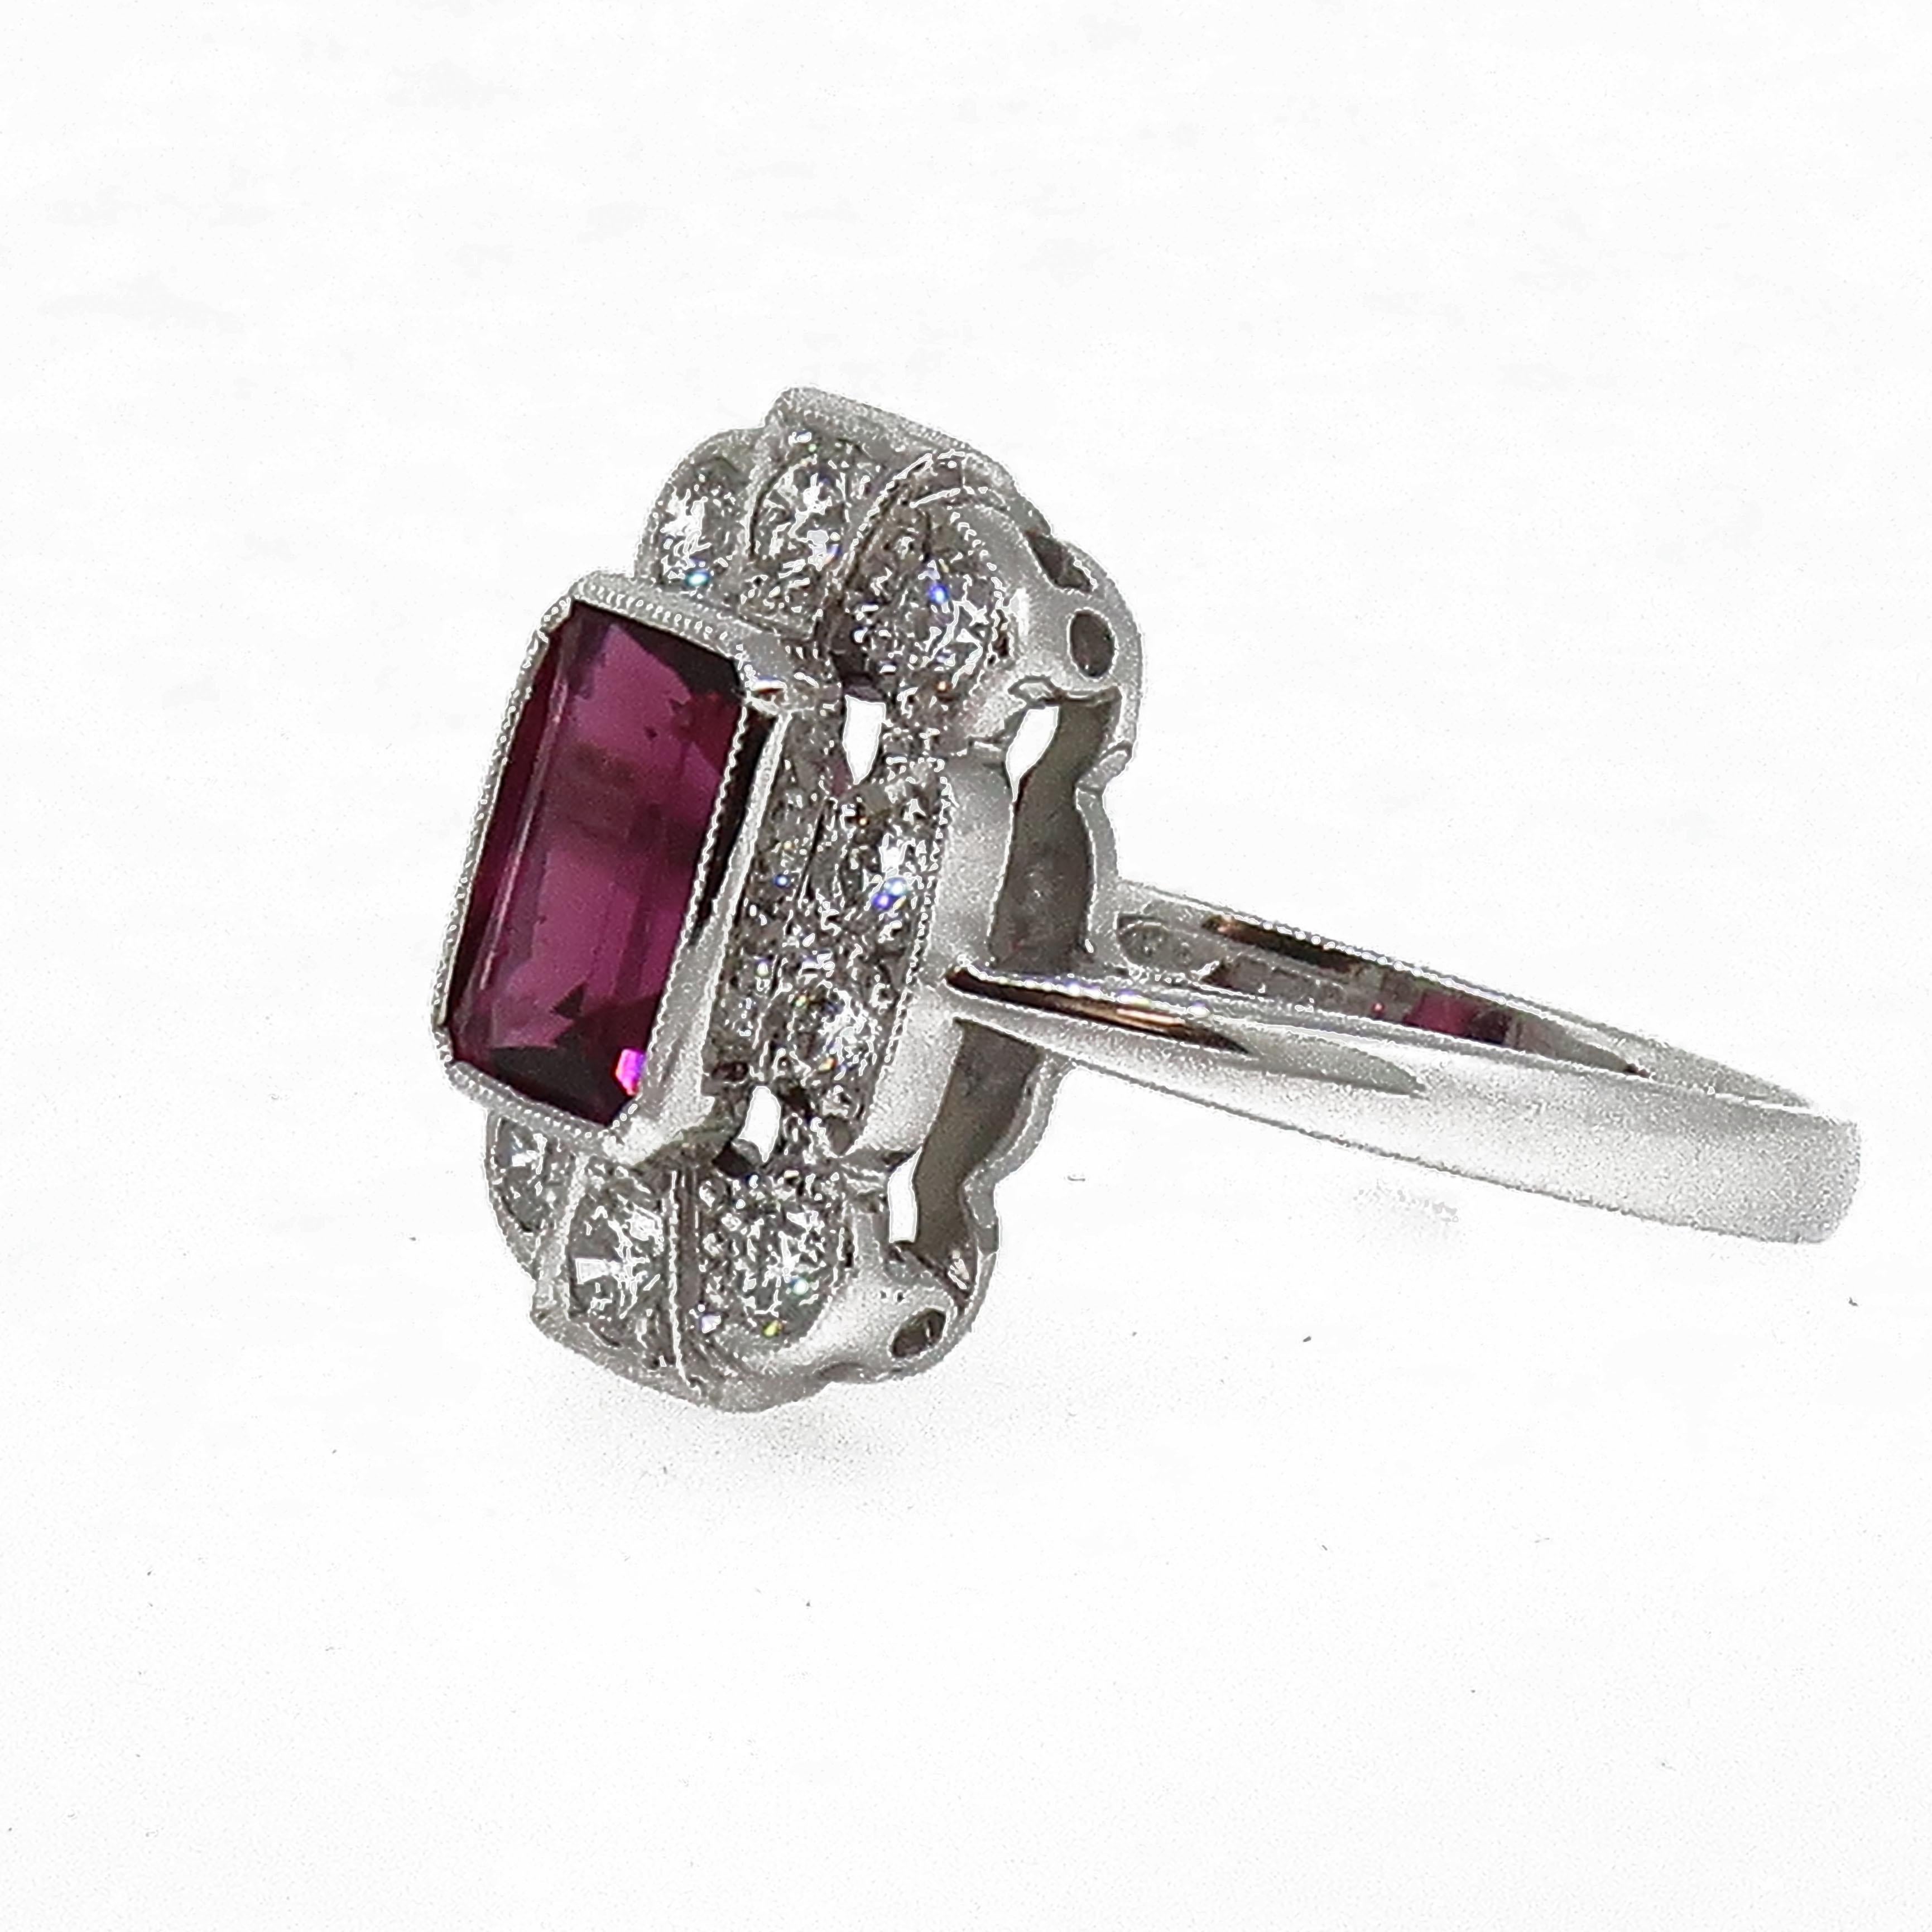 18Karat White Gold Rubellite Tourmaline & Diamond Art Deco Style Cluster Ring

A striking emerald cut rubellite / pink tourmaline set in a fine millegrain setting weighing 2.14ct, surrounded by ten round brilliant cut diamonds all set in a fine